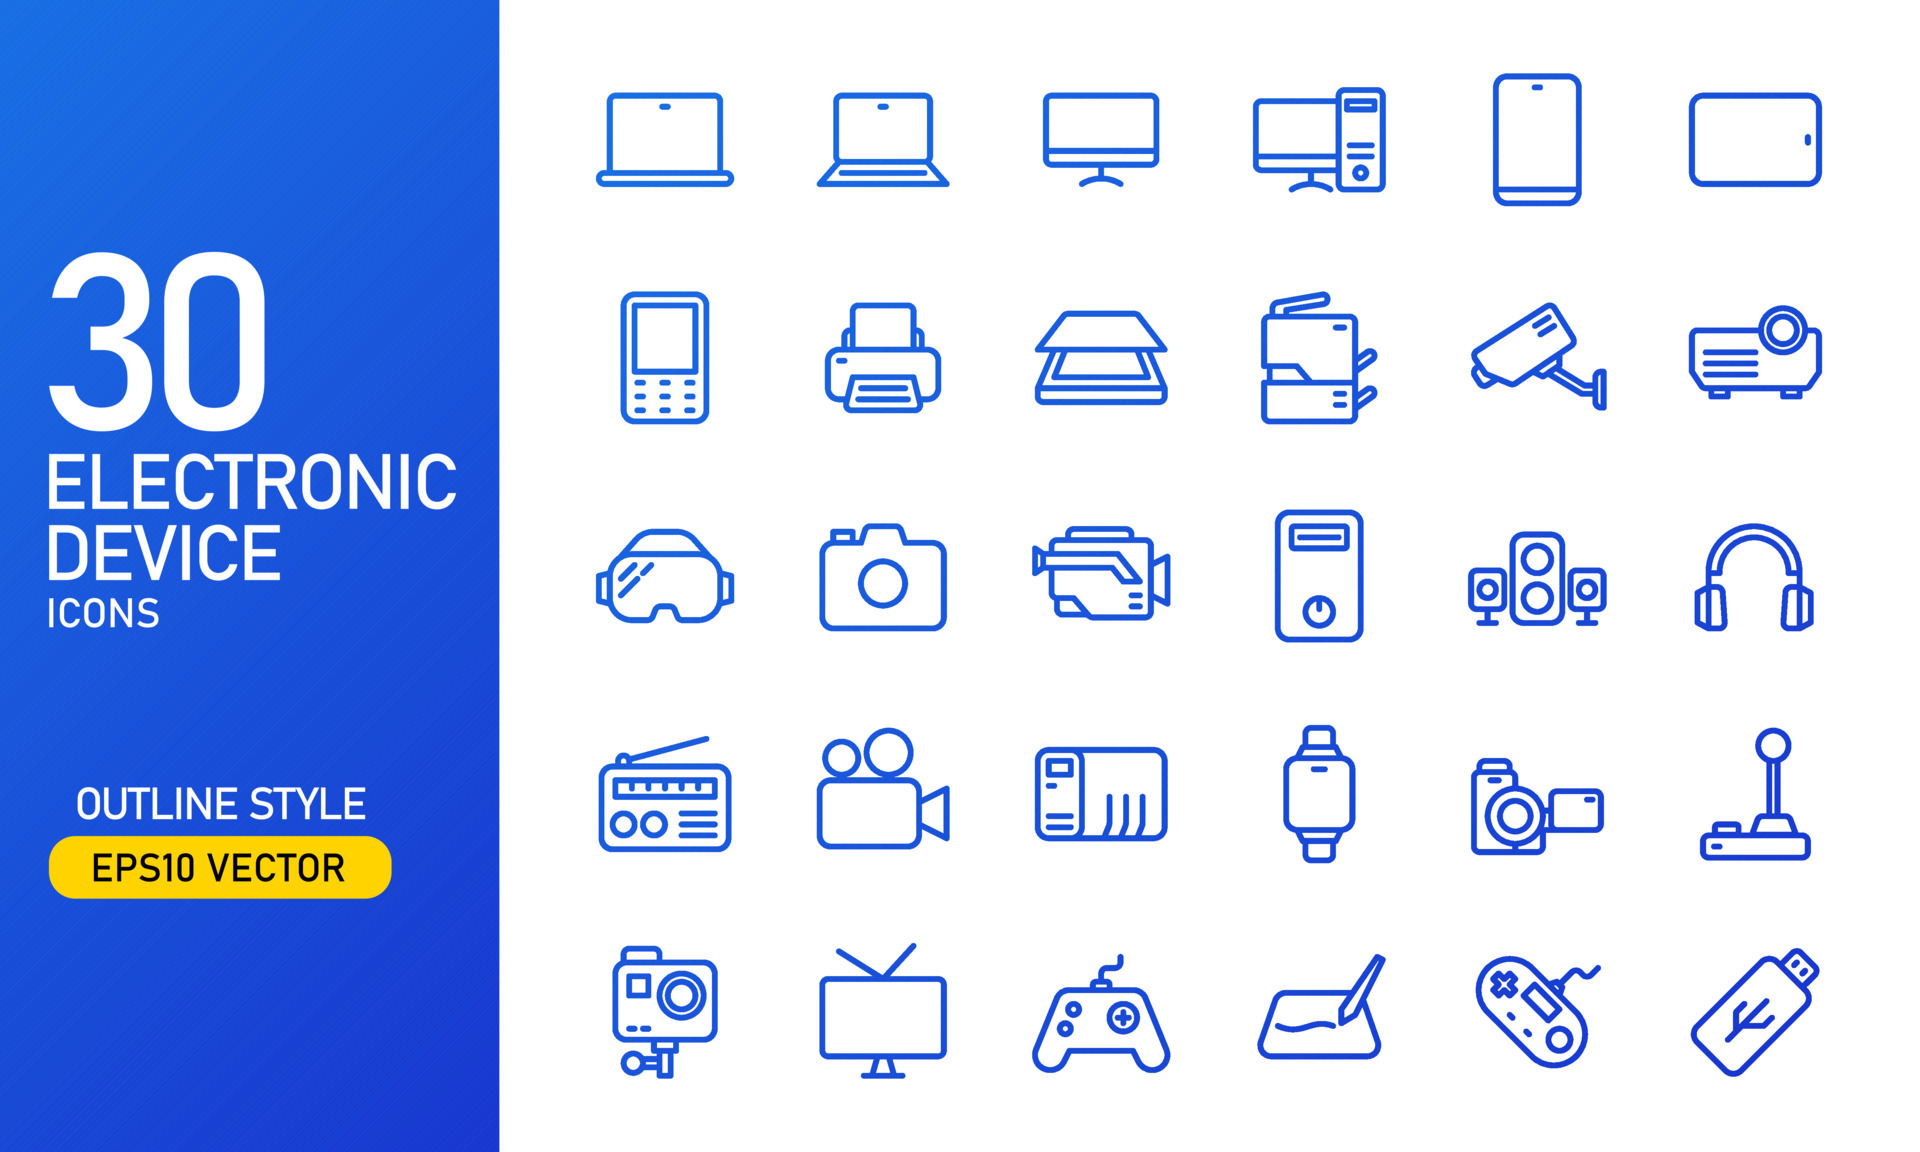 Electronic device icon set in outlined style. Suitable for design ...